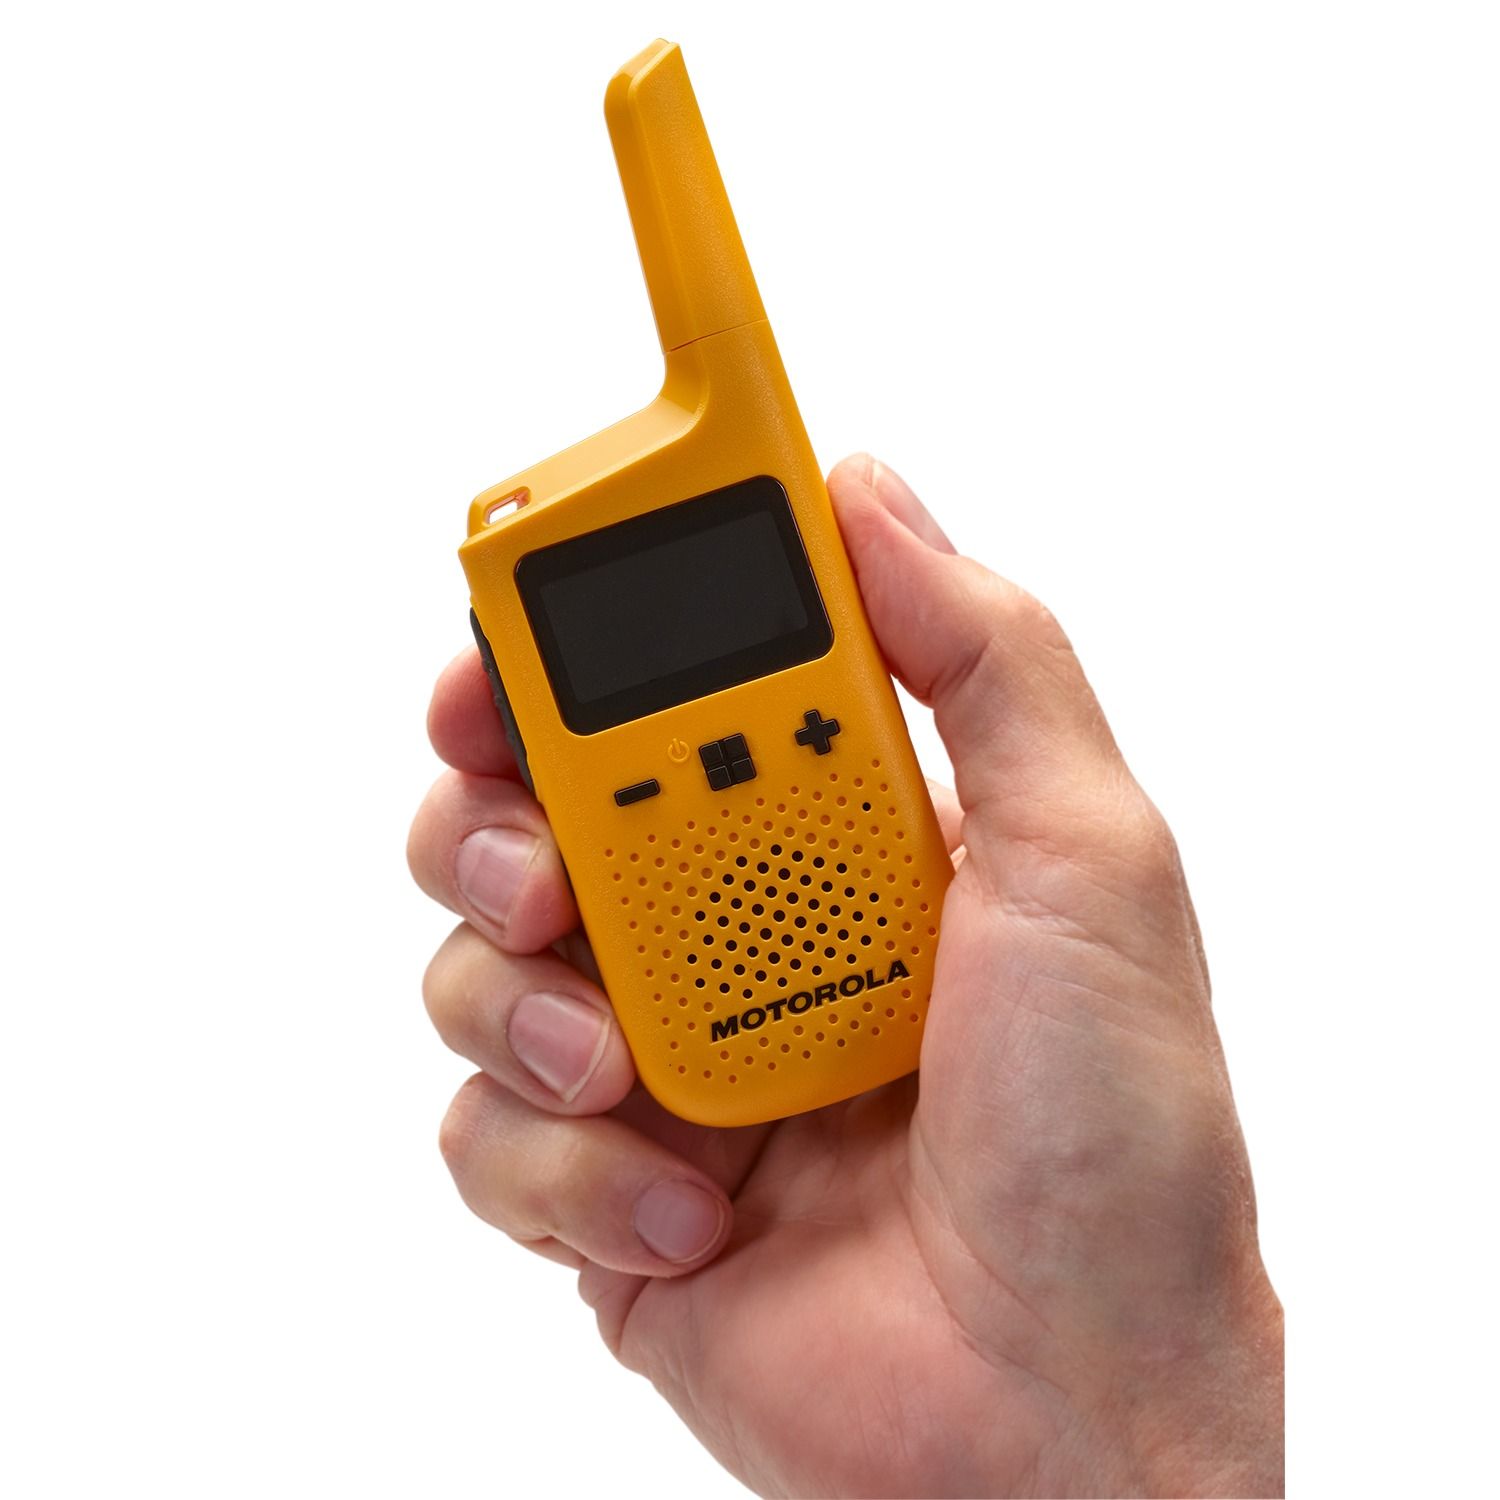 t380 (yellow) walkie talkie handheld, fits in palm